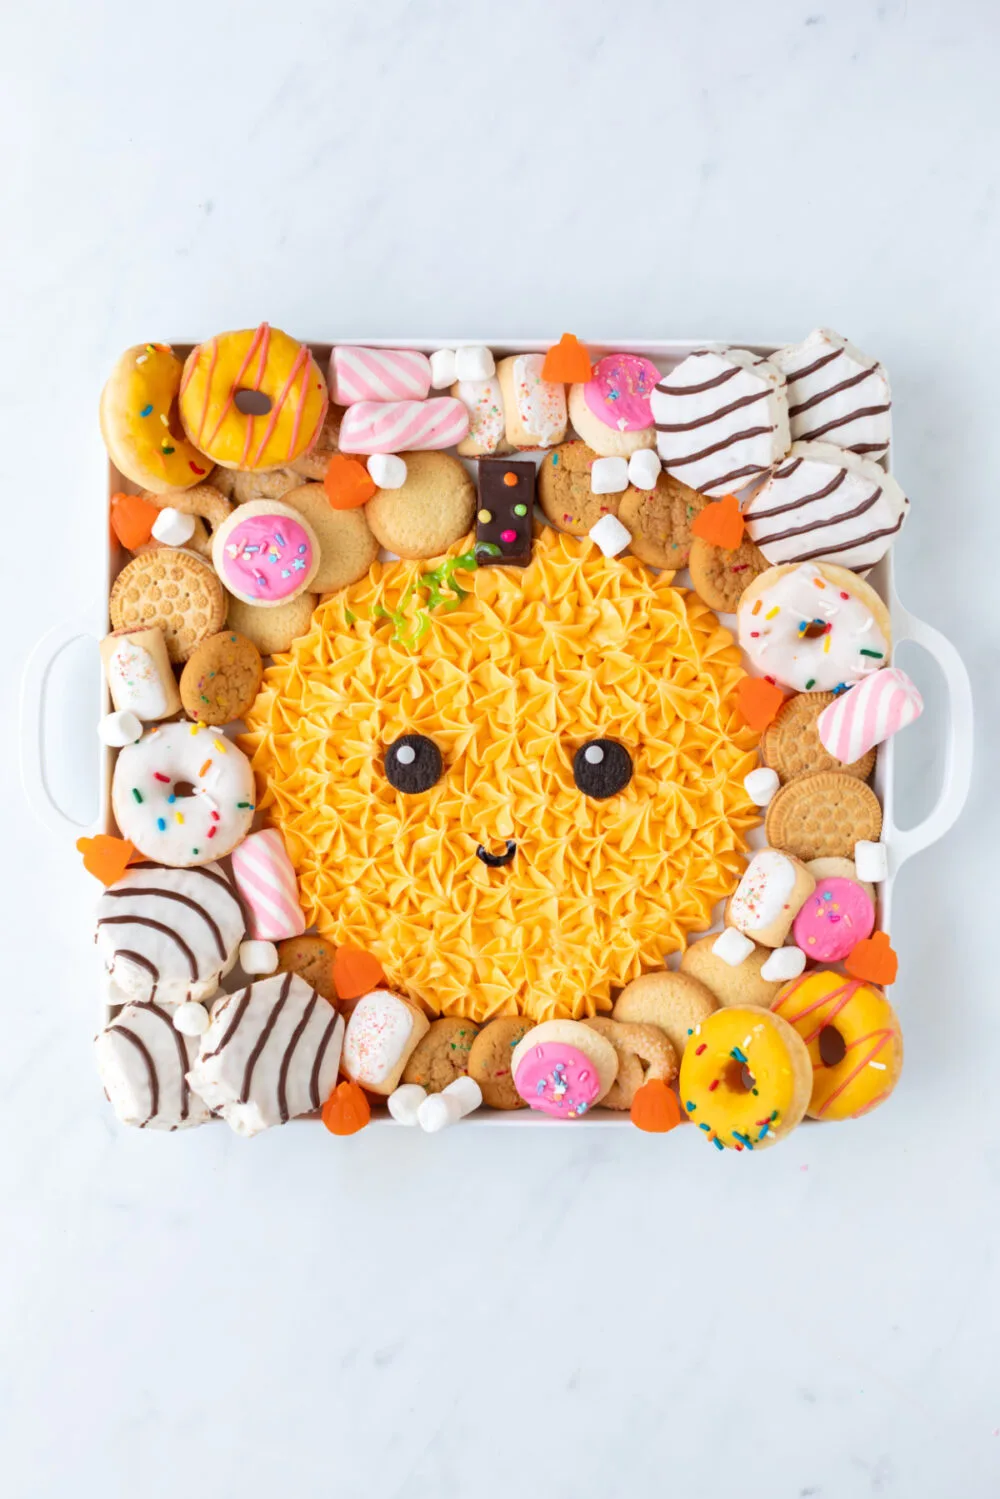 Cakes, candies, donuts, and cookies around an icing pumpkin on a board. 